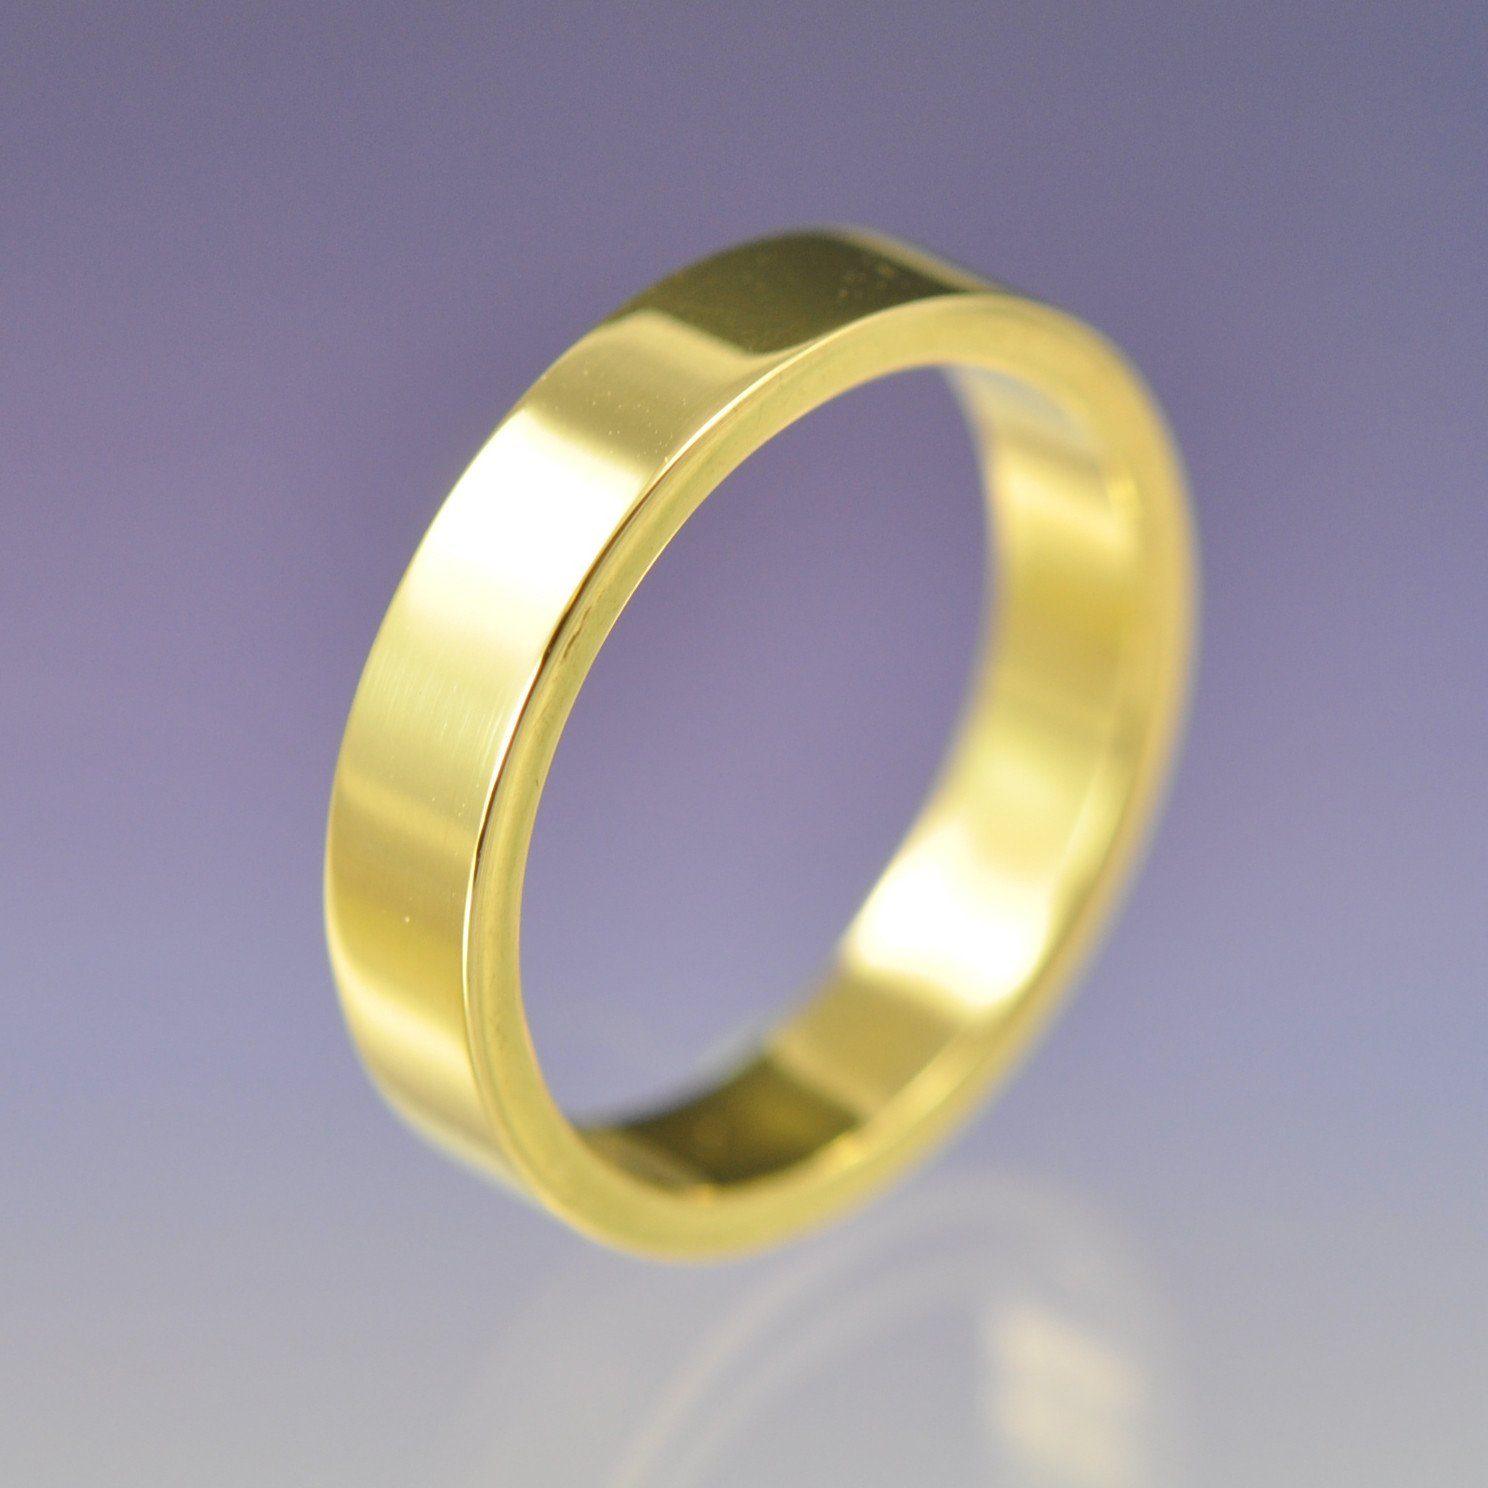 Plain Band 9k - Flat Shank Ring by Chris Parry Jewellery